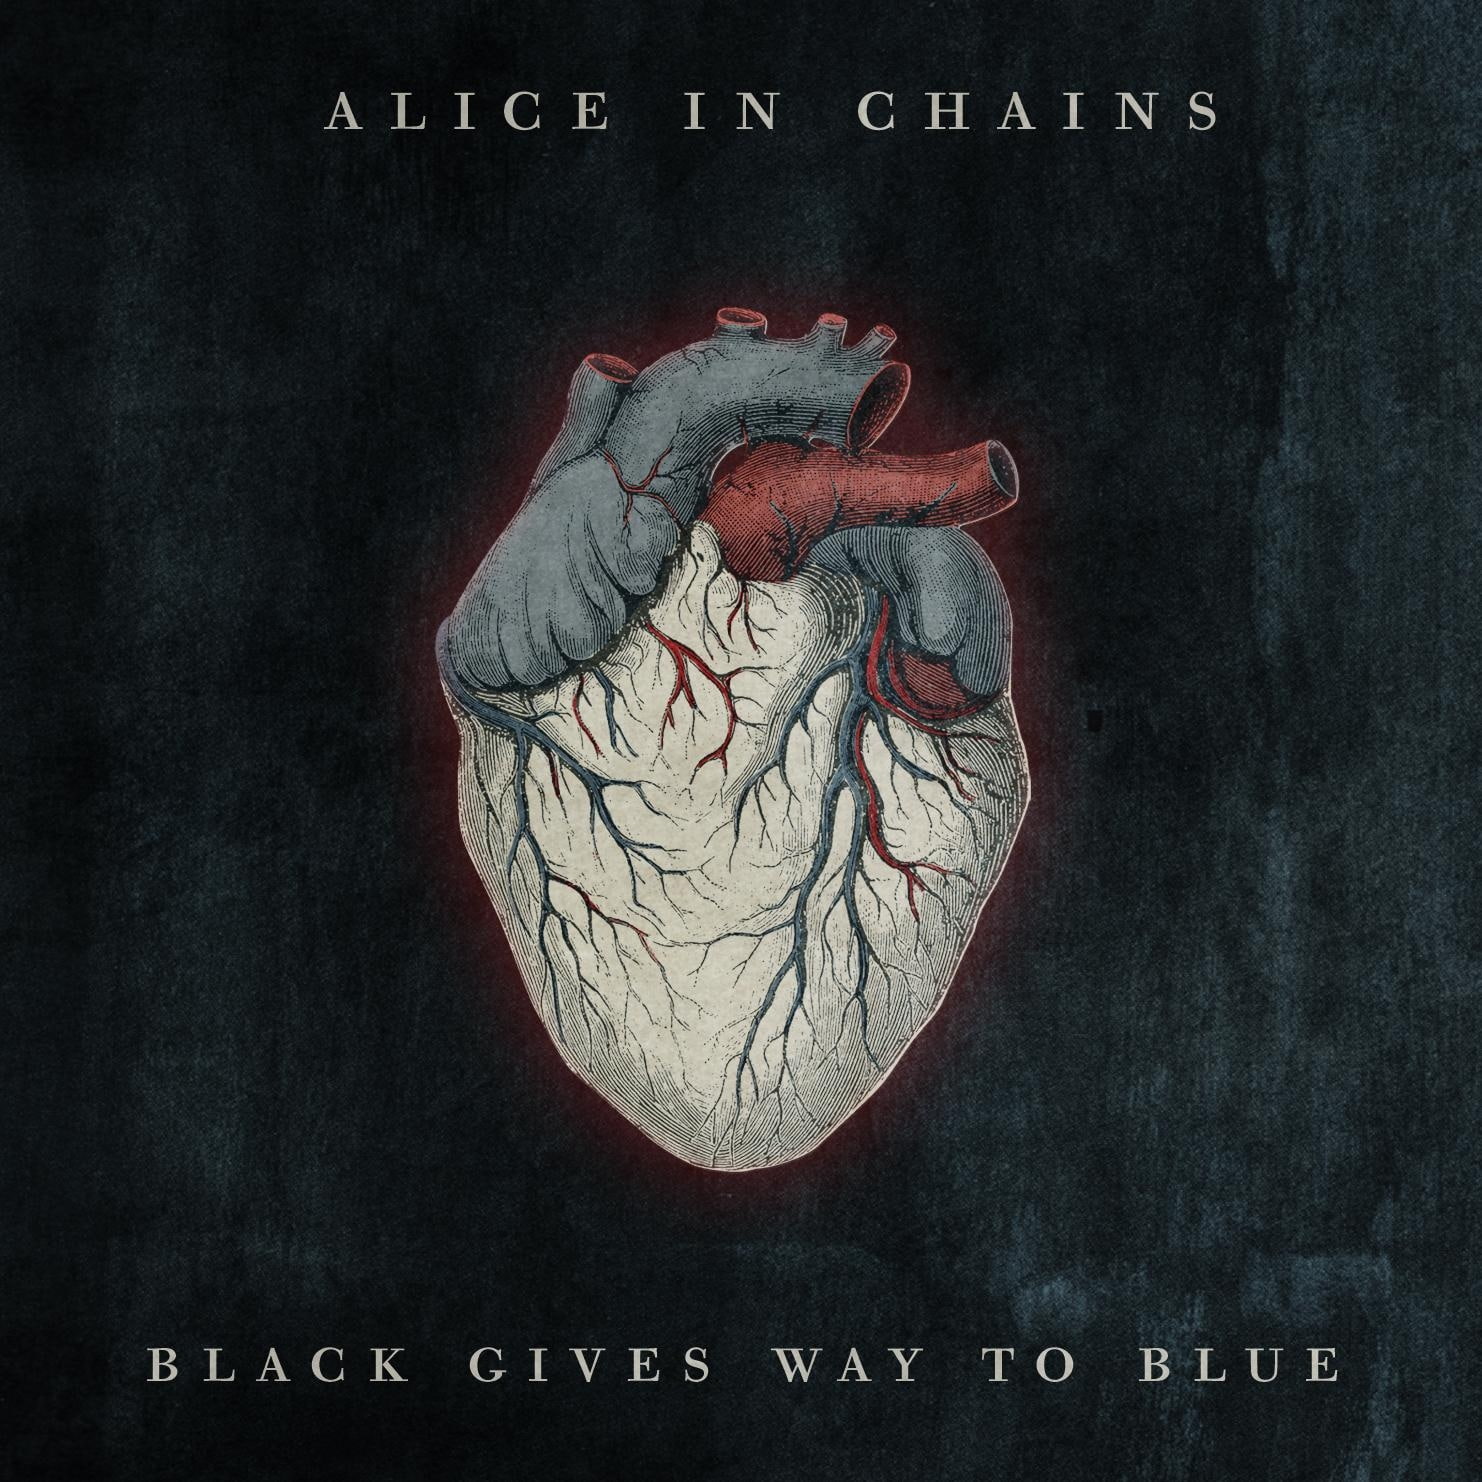 blue black music front alice in chains music bands album covers 1482x1482  Entertainment Music HD Art